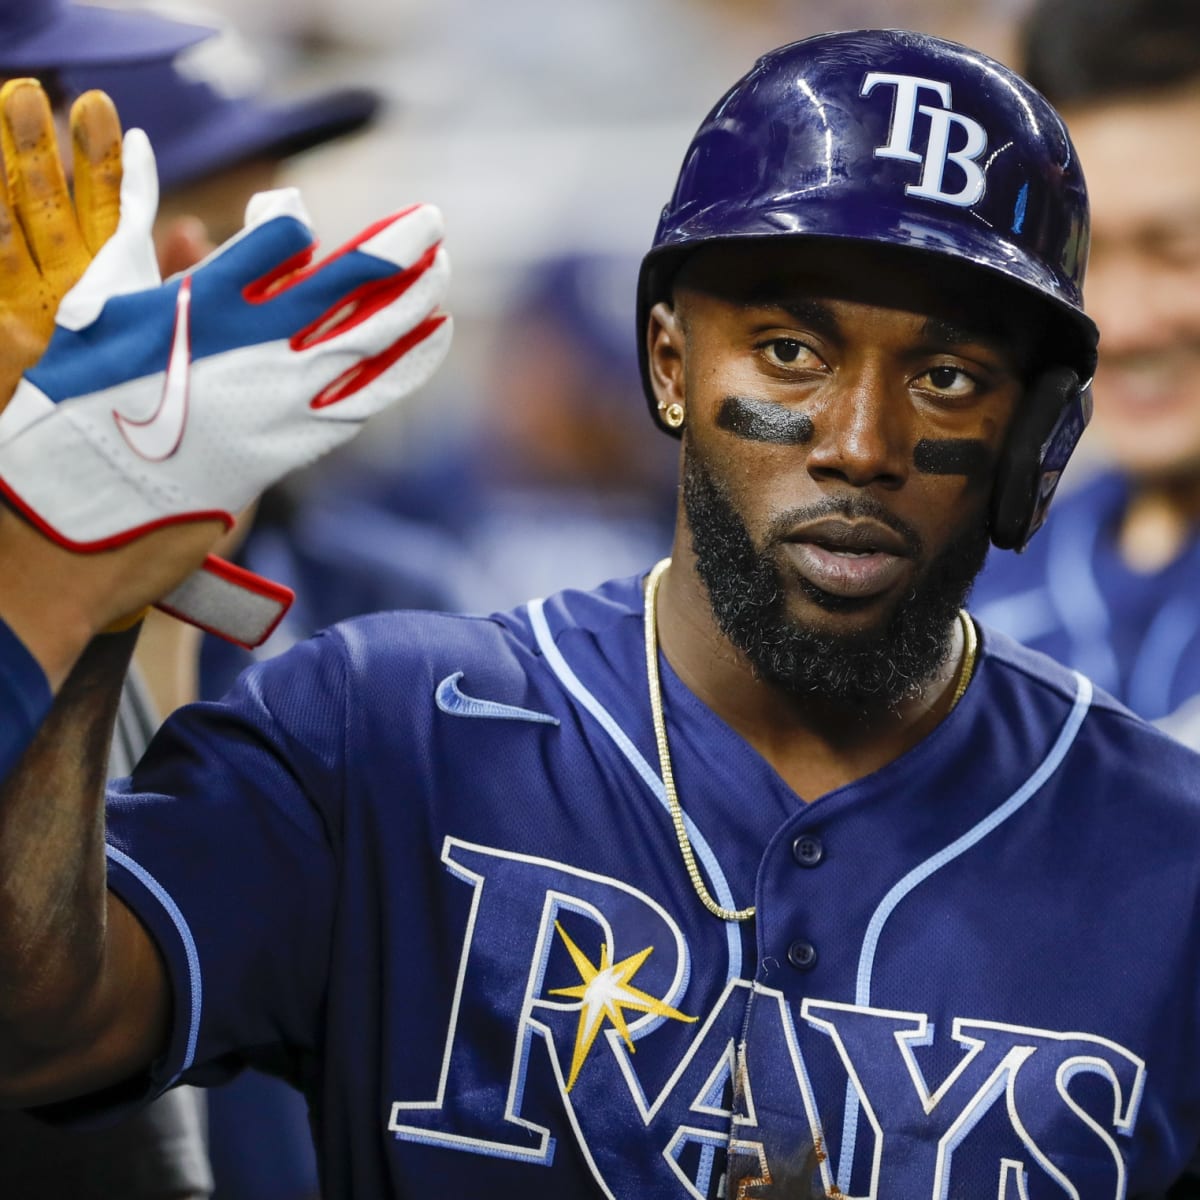 MLB-best Rays lose ace McClanahan to back injury, and game 6-5 to lowly  Royals - The San Diego Union-Tribune